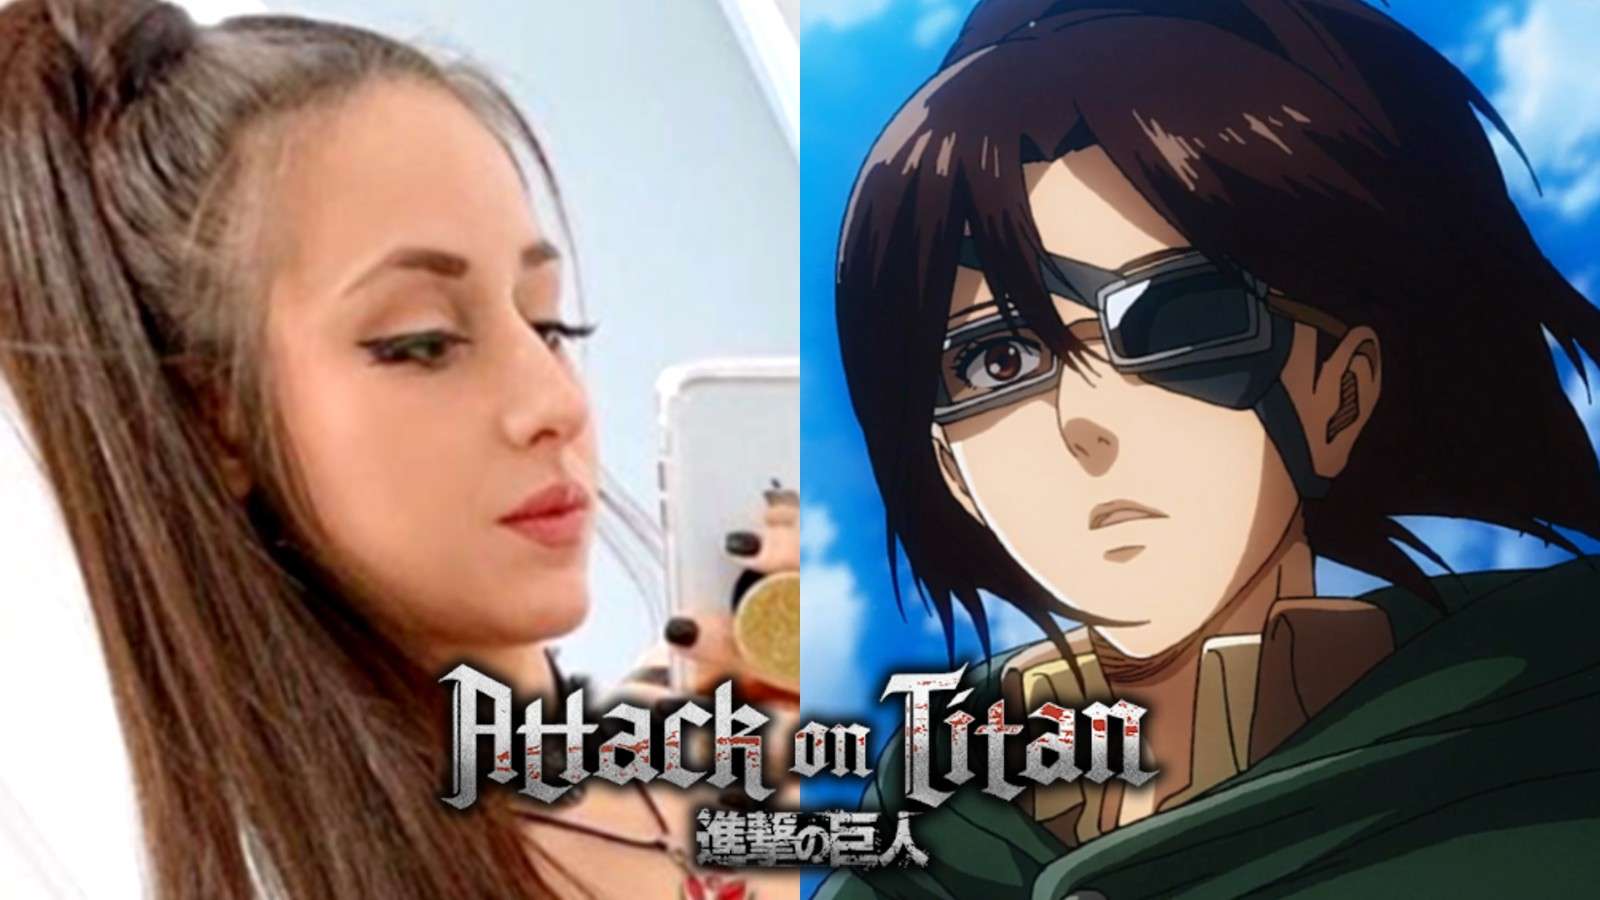 Cosplayer kalikins7 poses nect to Hange from Attack on Titan